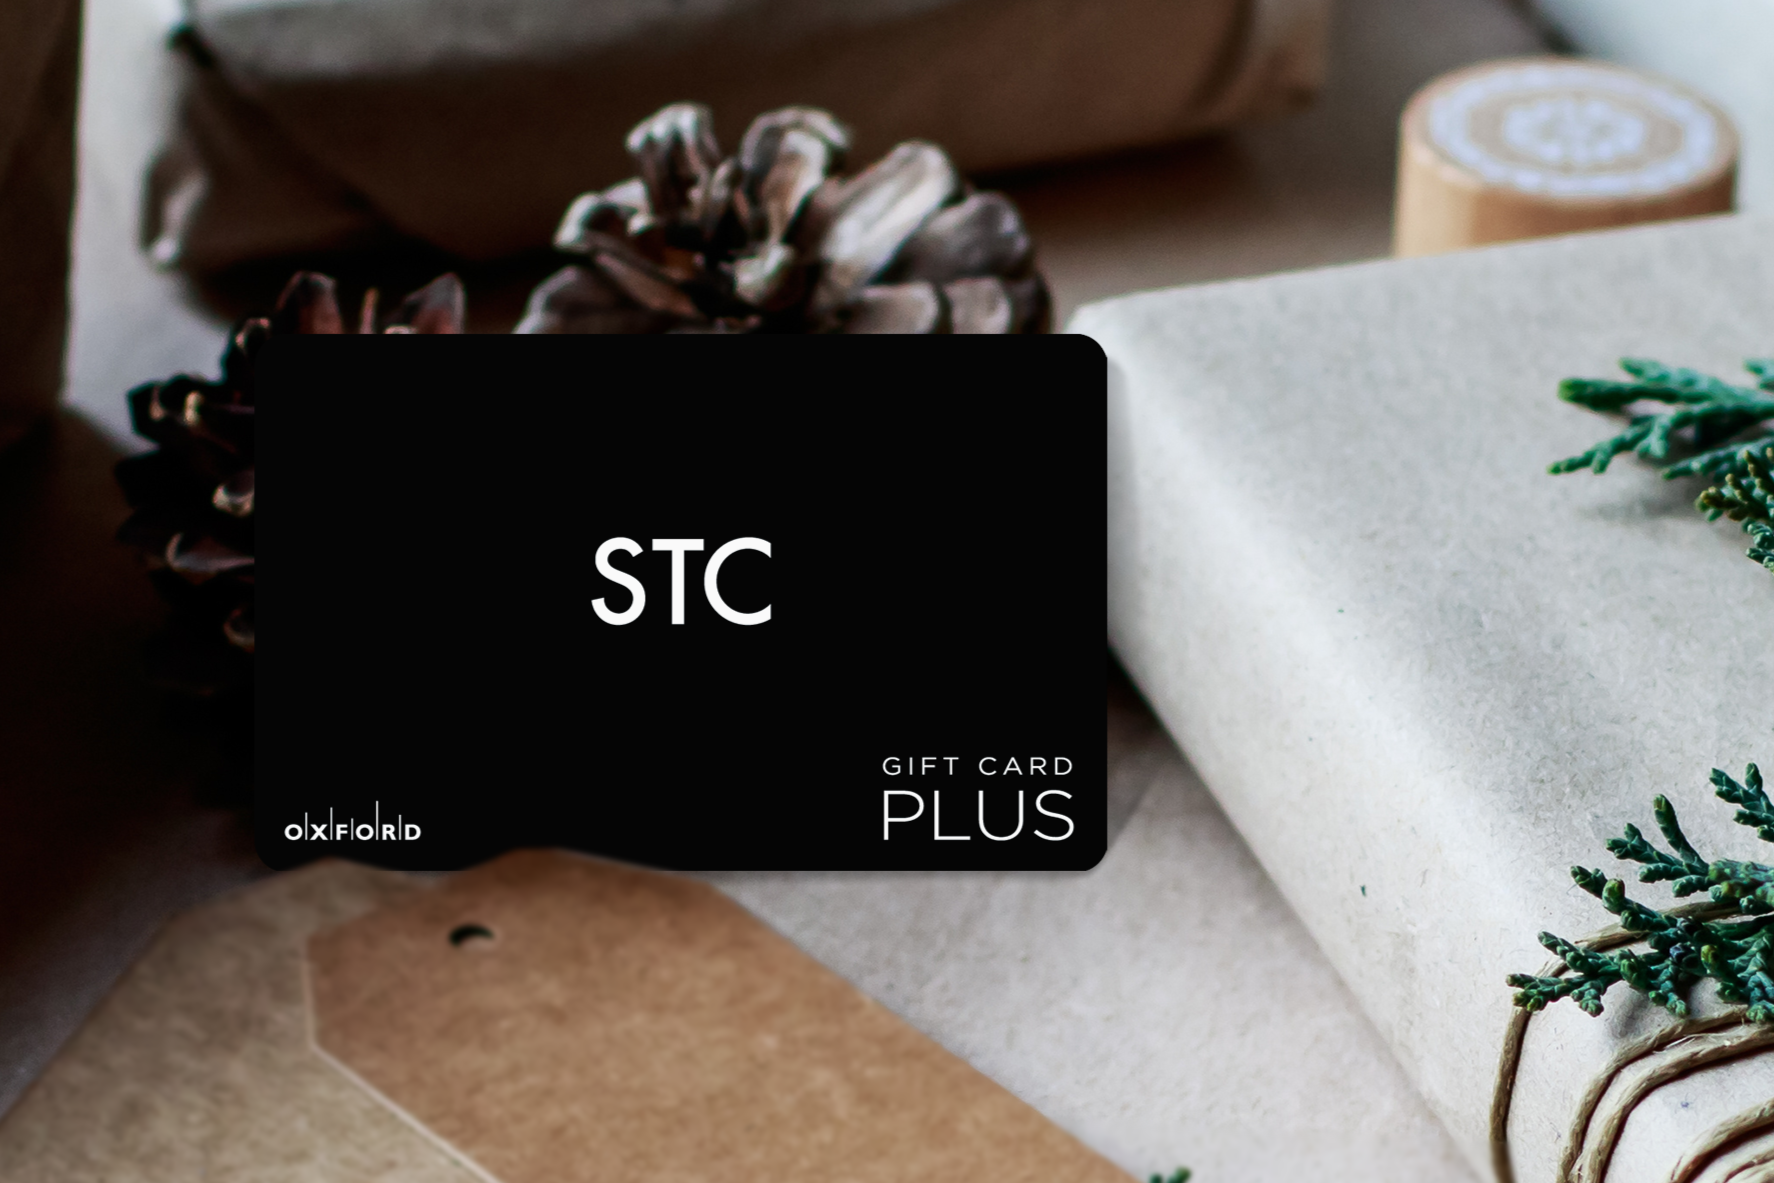 promotional image of a black STC gift card surrounded by gift-wrapped books in a holiday setting